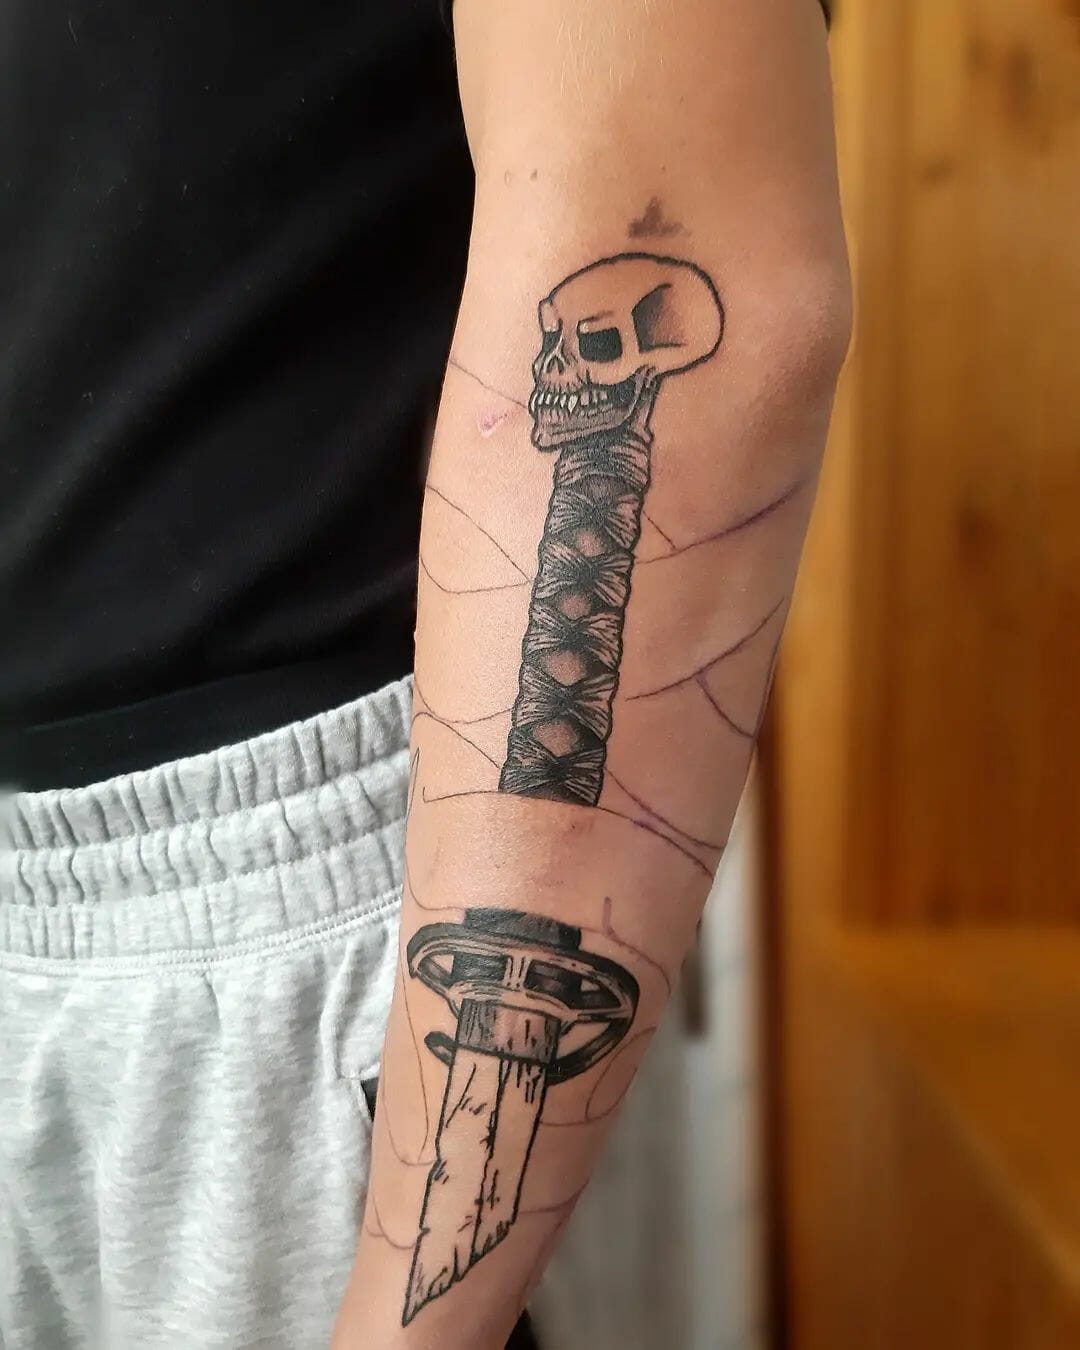 10 Best Katana Tattoo Ideas You Have To See To Believe! | Outsons | Men ...